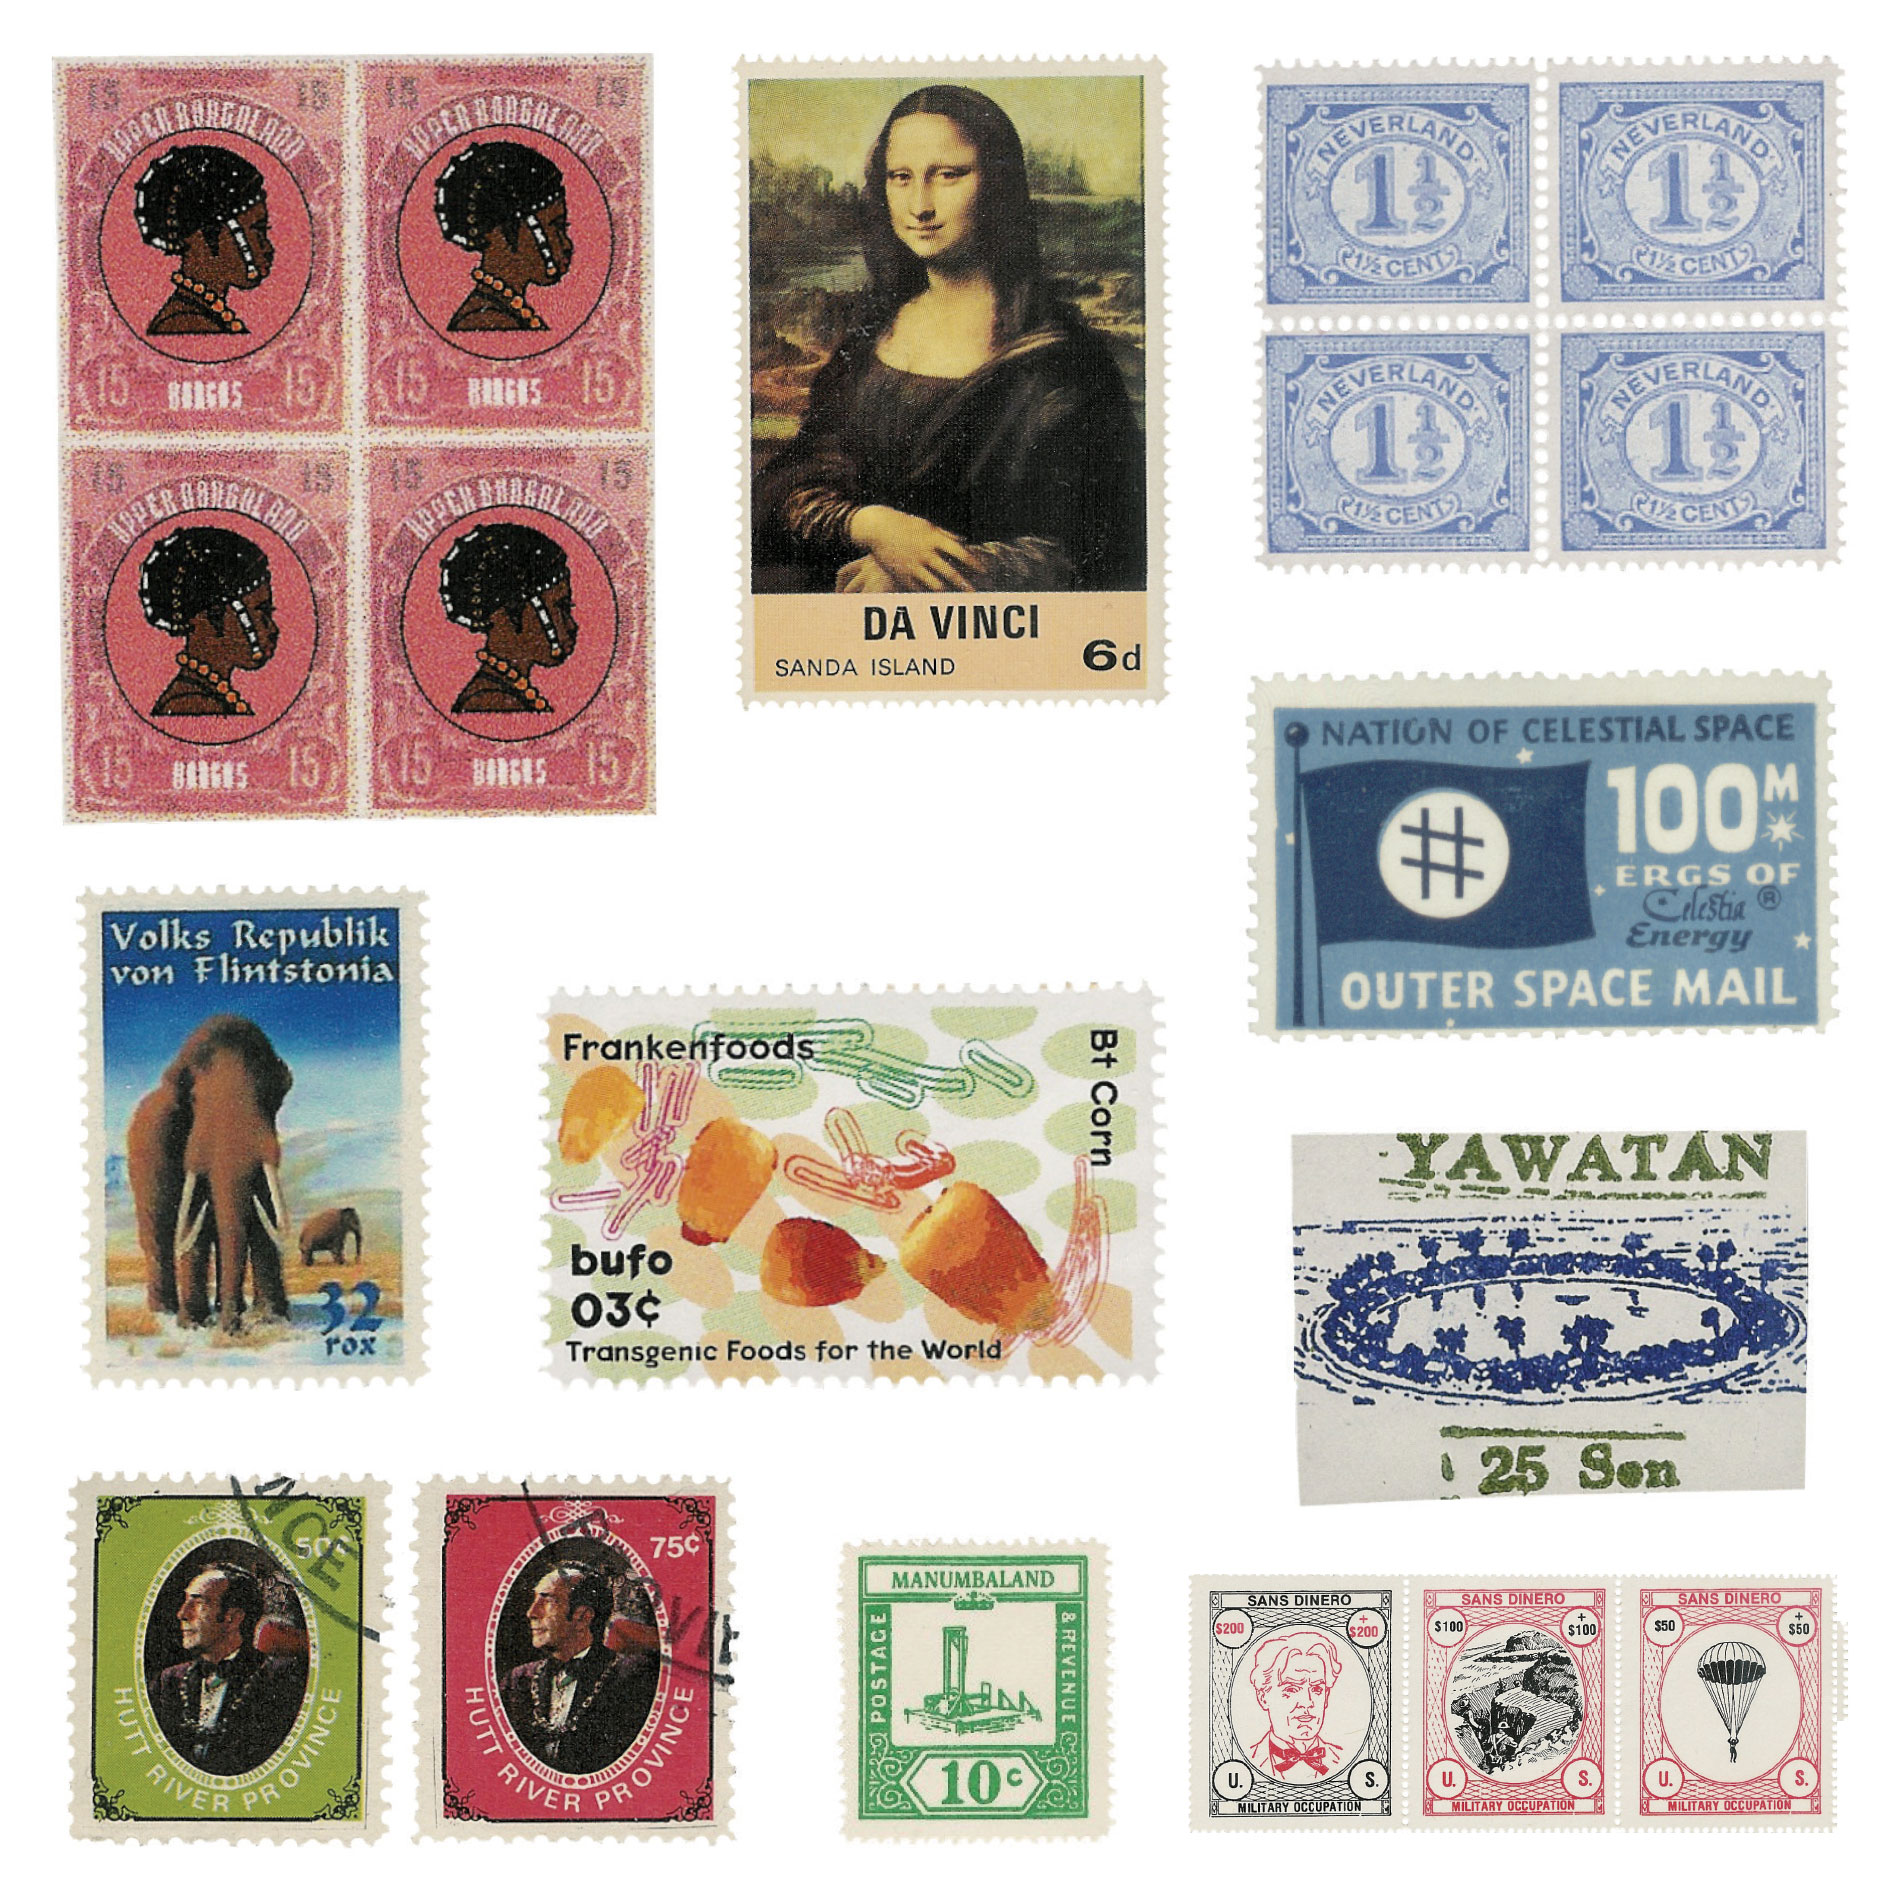 An array of fantasy postage stamps from the authors’ collection.